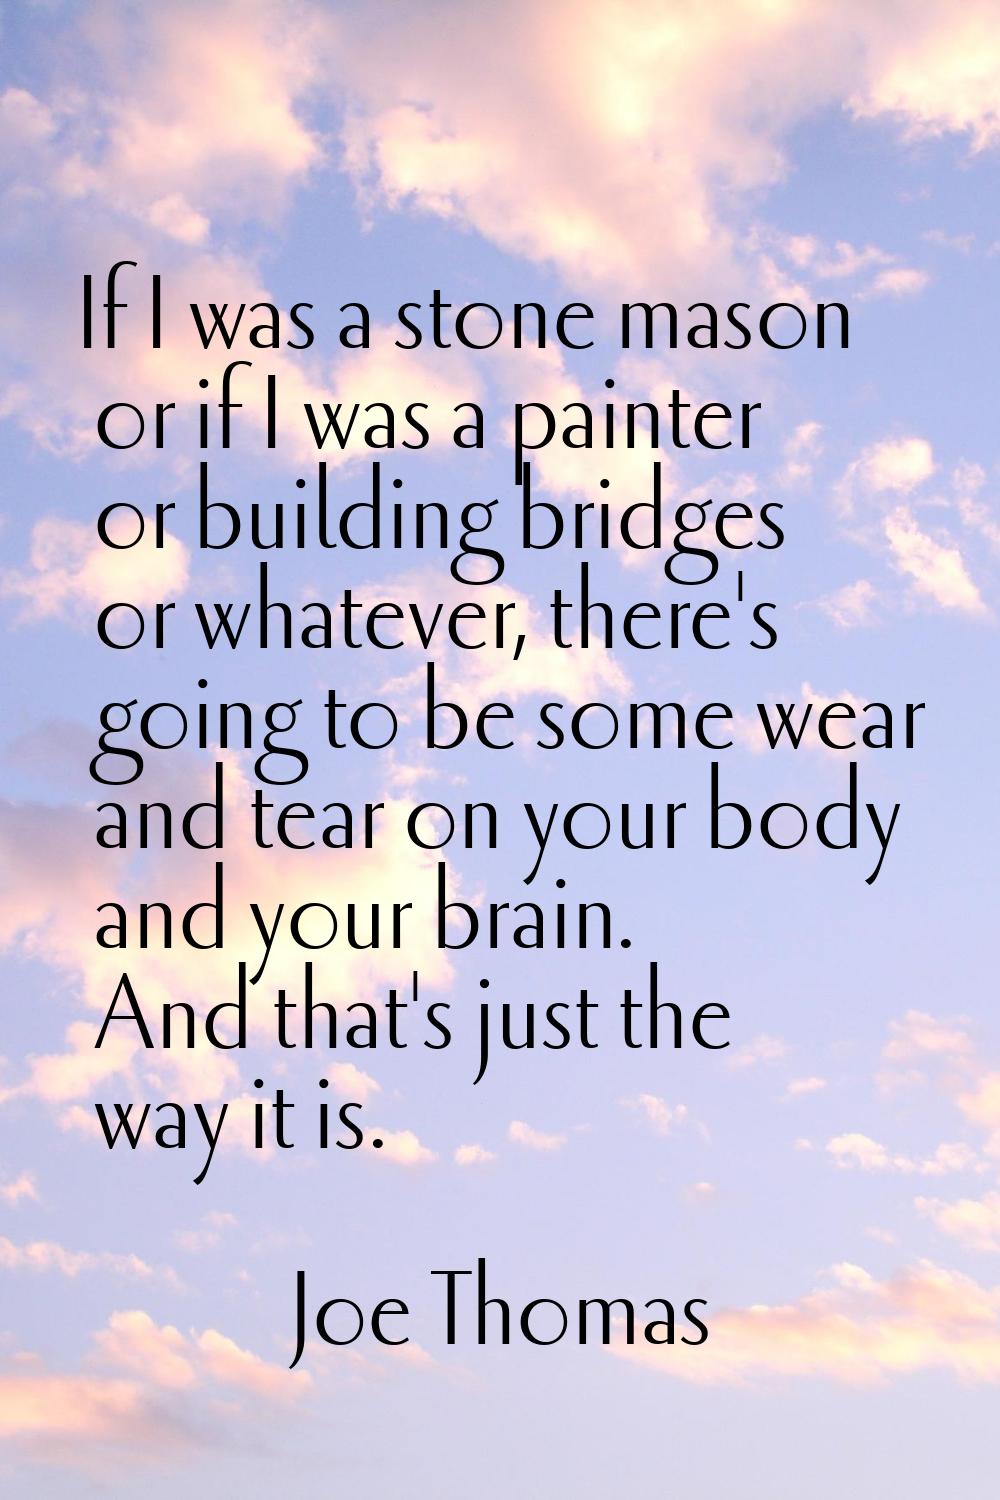 If I was a stone mason or if I was a painter or building bridges or whatever, there's going to be s